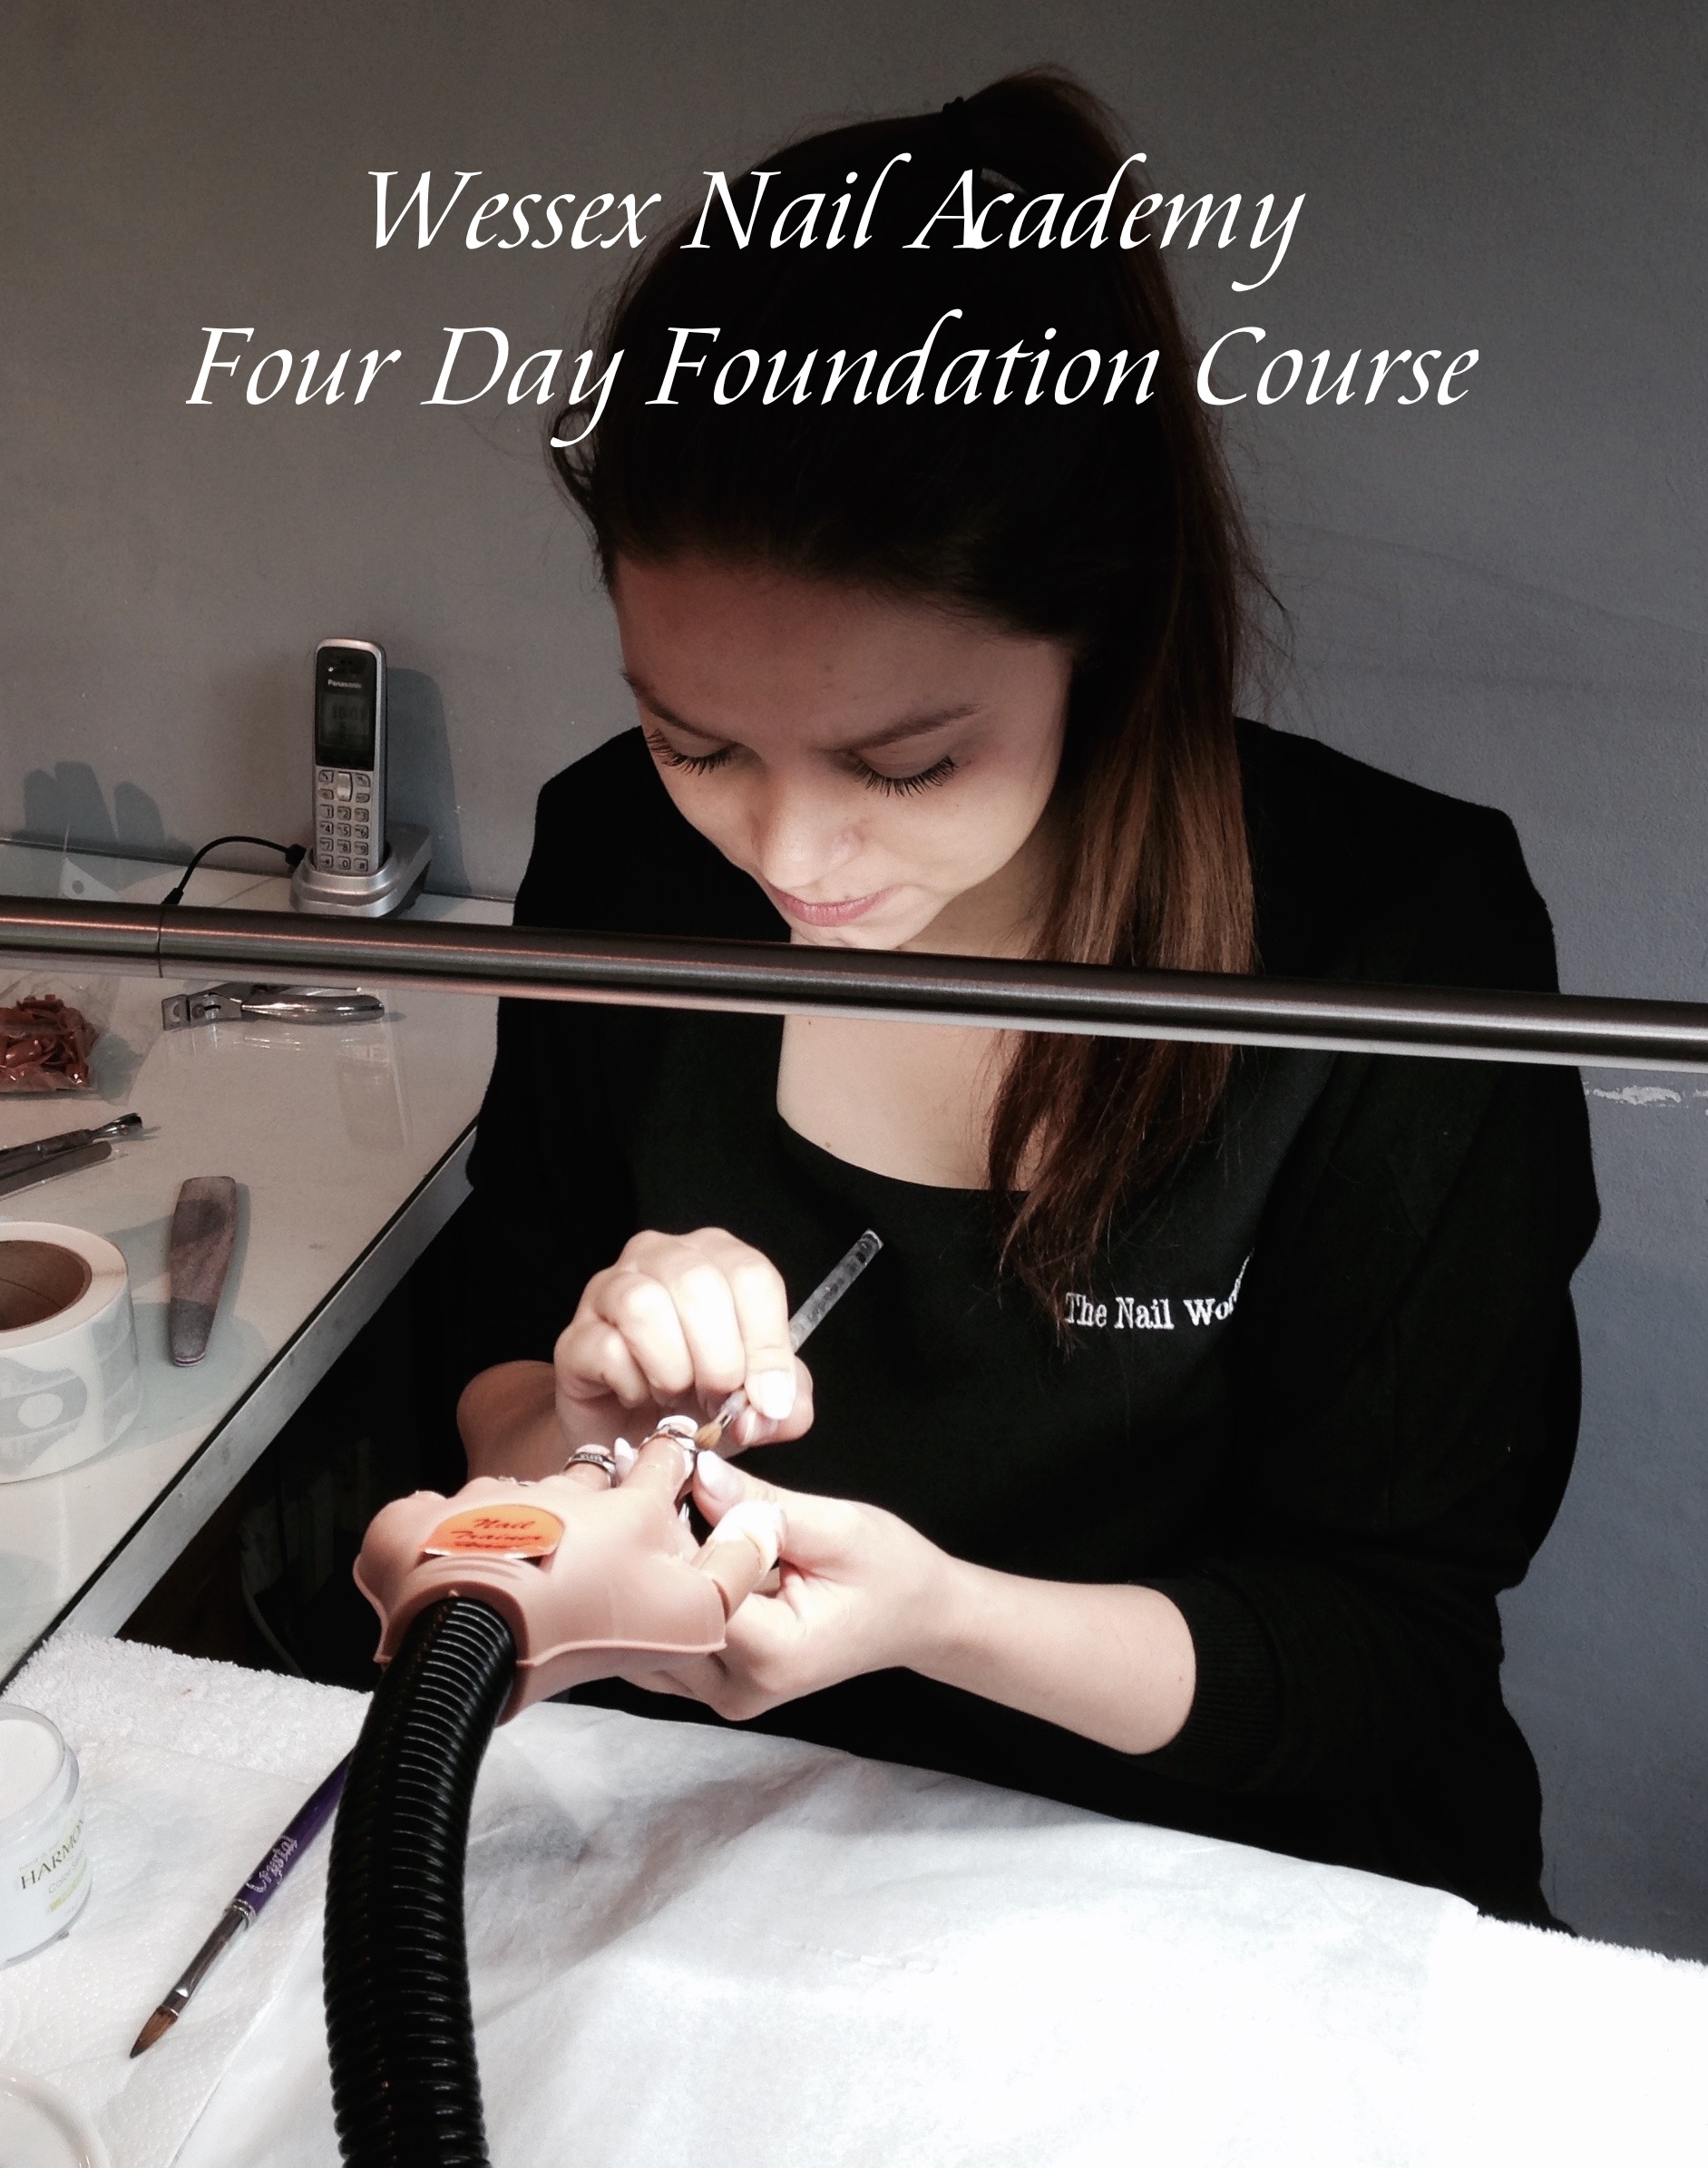 Acrylic nail Training course, Nail extension training , nail training course, Wessex Nail Academy Okeford Fitzpaine, Dorset